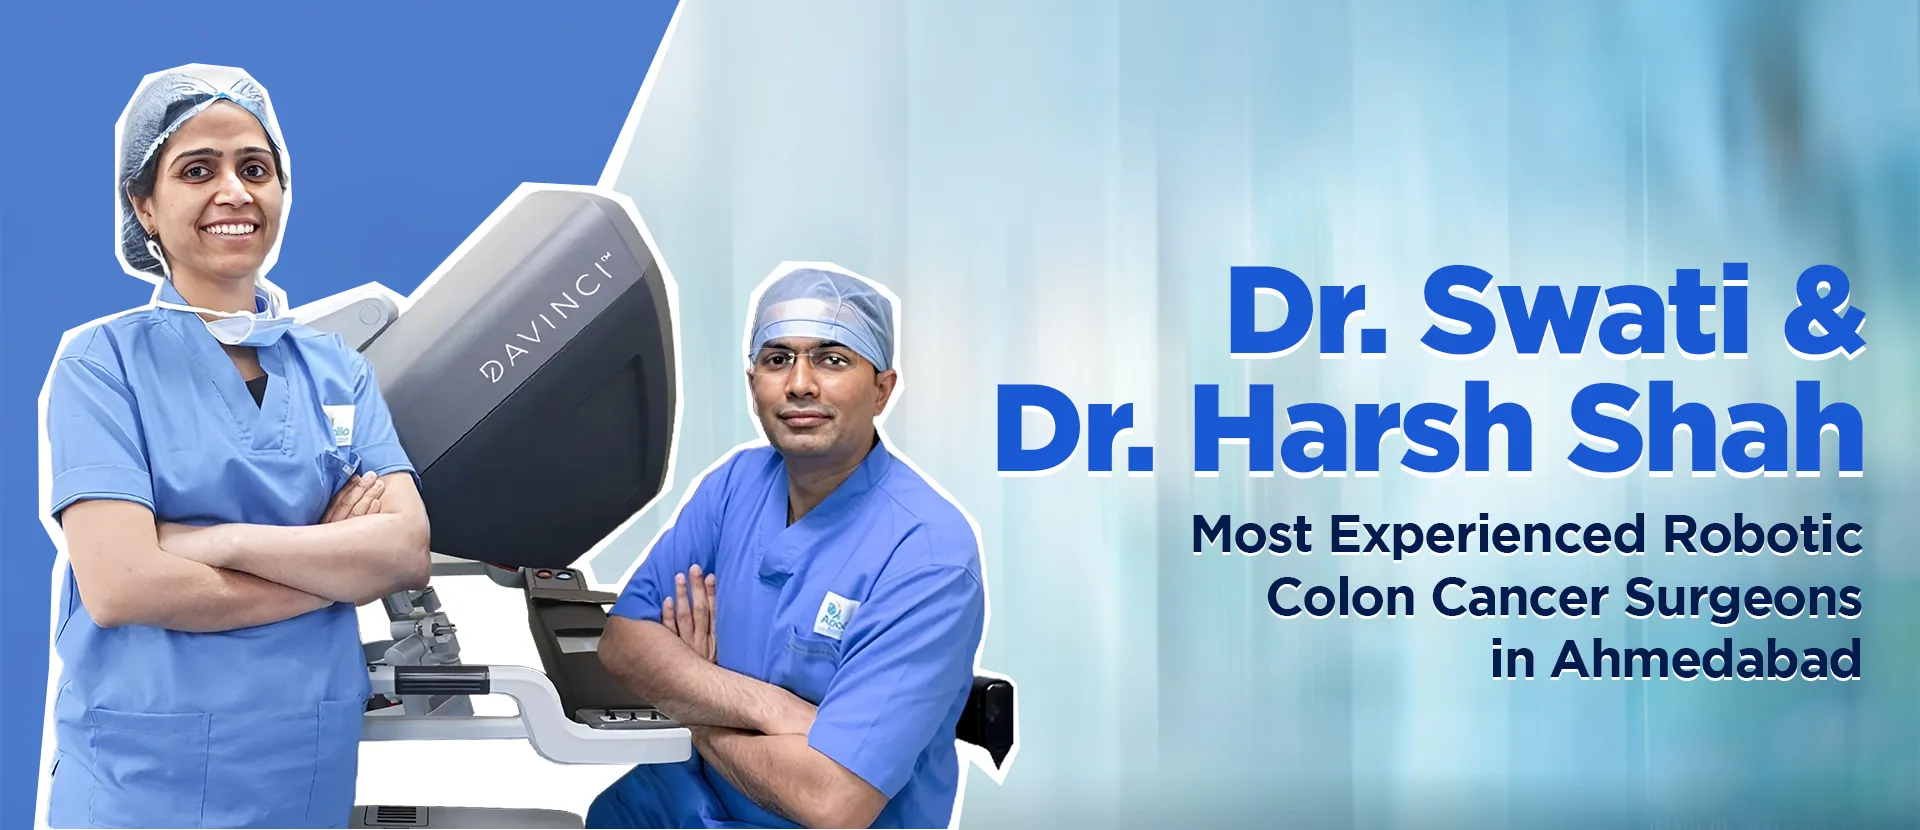 Best Colon cancer Treatment with Robotic Surgery in Ahmedabad, Gujarat, India